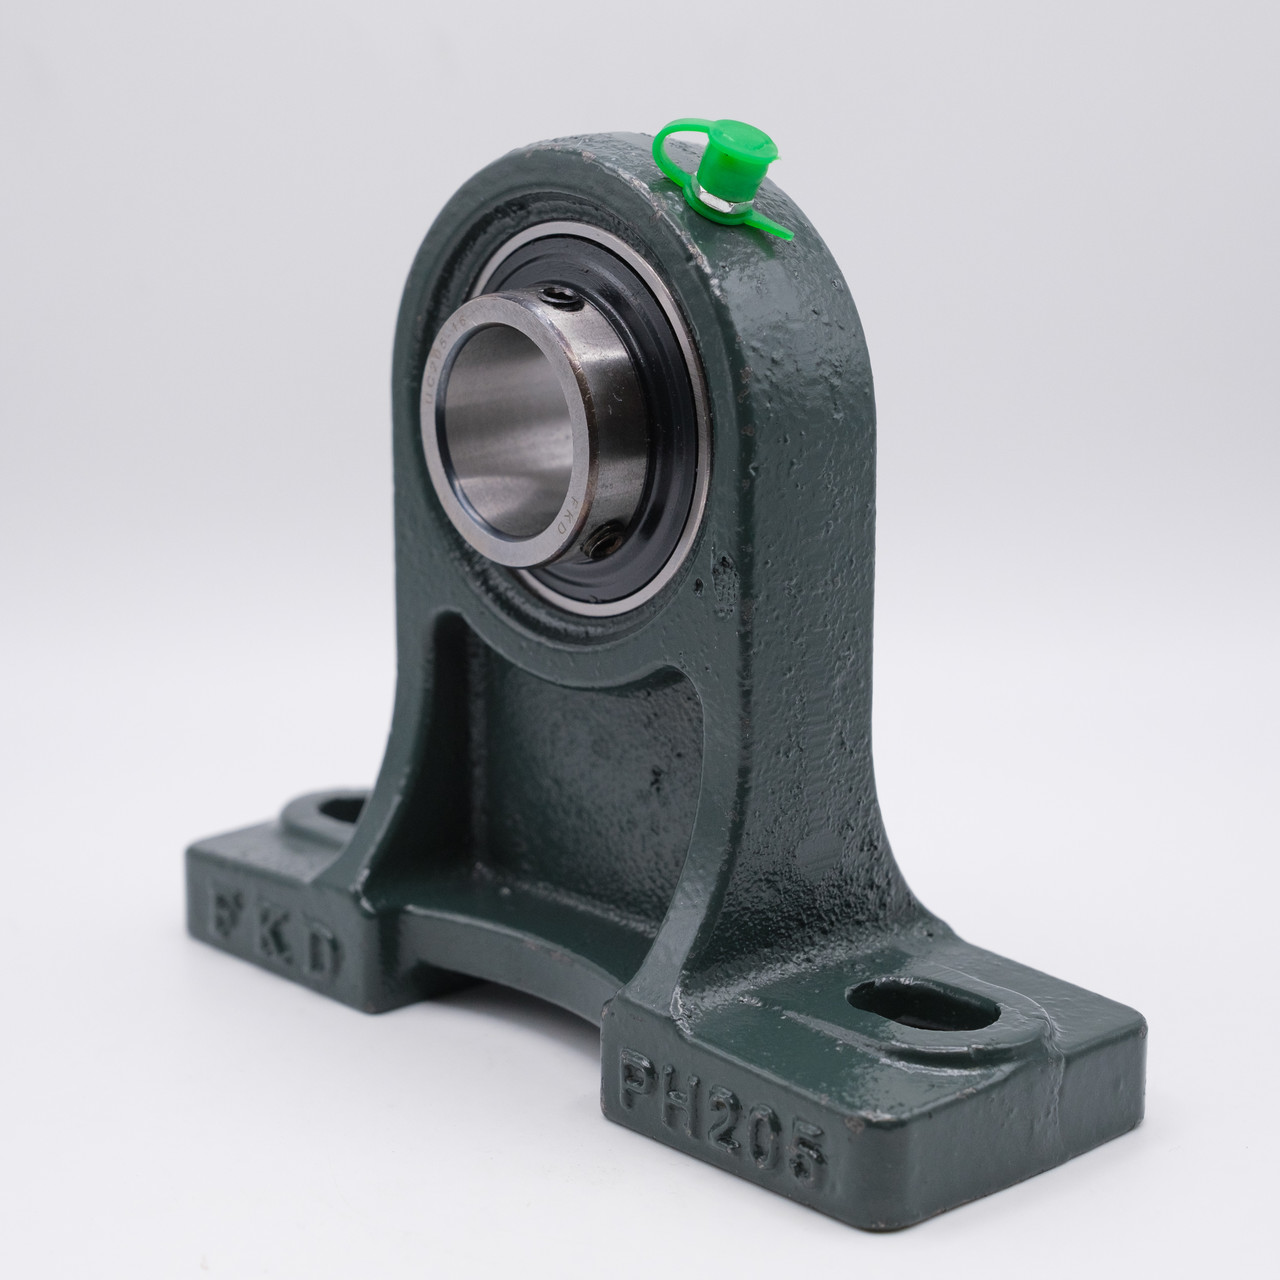 UCPH202 GENERIC 15mm Normal duty 2 Bolt Cast Iron Pillow Block Housed Unit Bearing with extended base to centre height - Metric Thumbnail